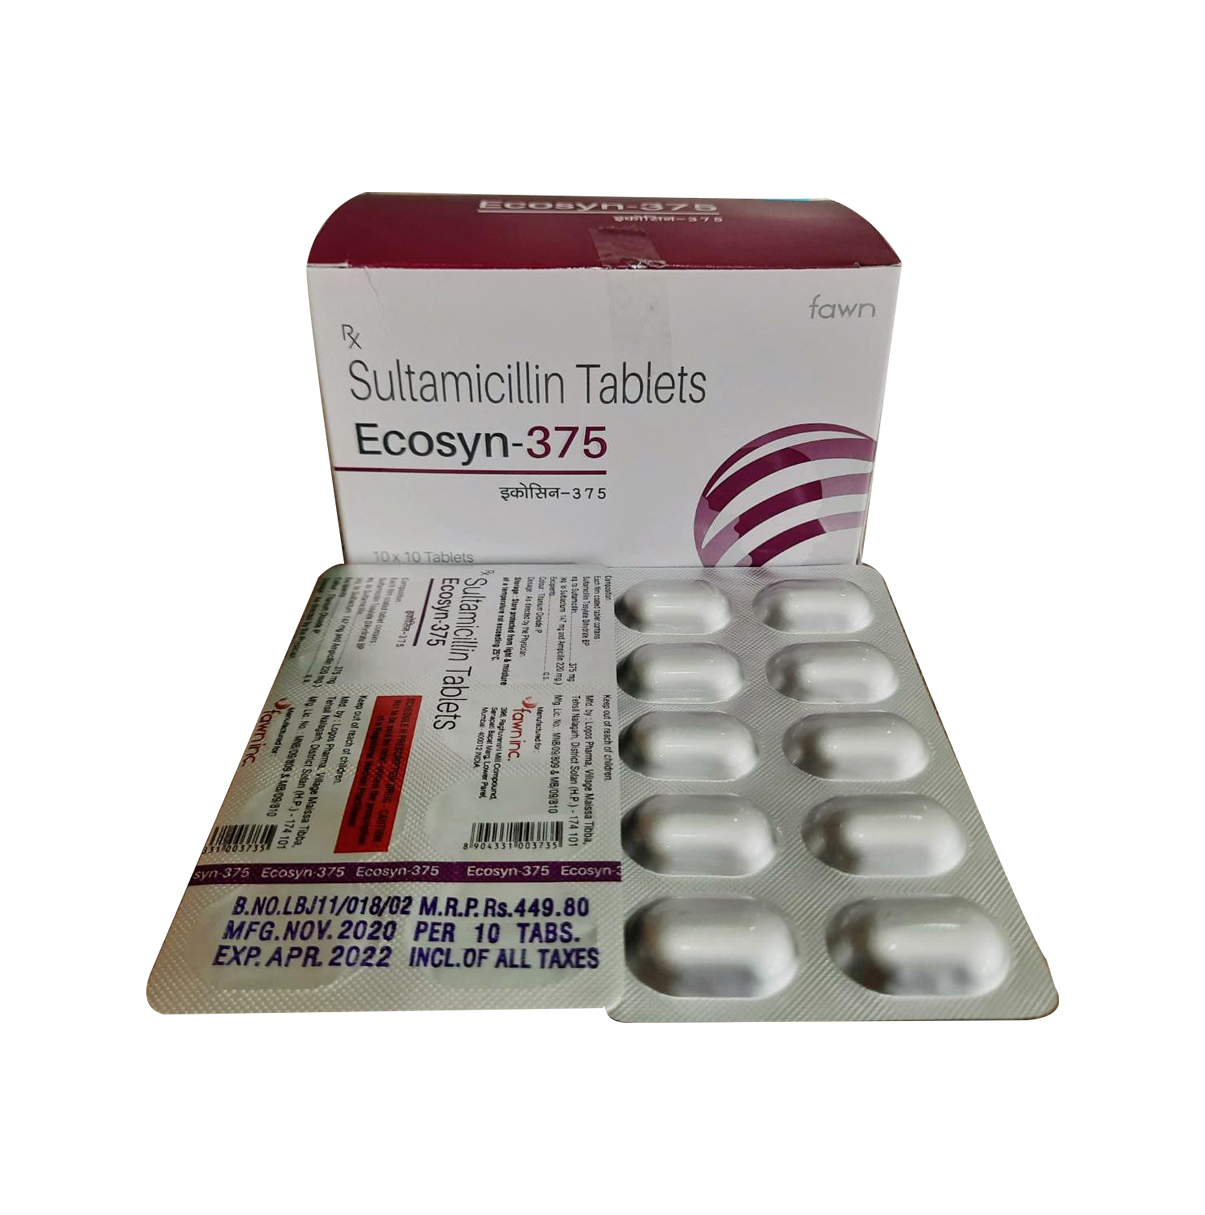 Product Name: ECOSYN 375, Compositions of ECOSYN 375 are Sultamicillin 375 mg. - Fawn Incorporation